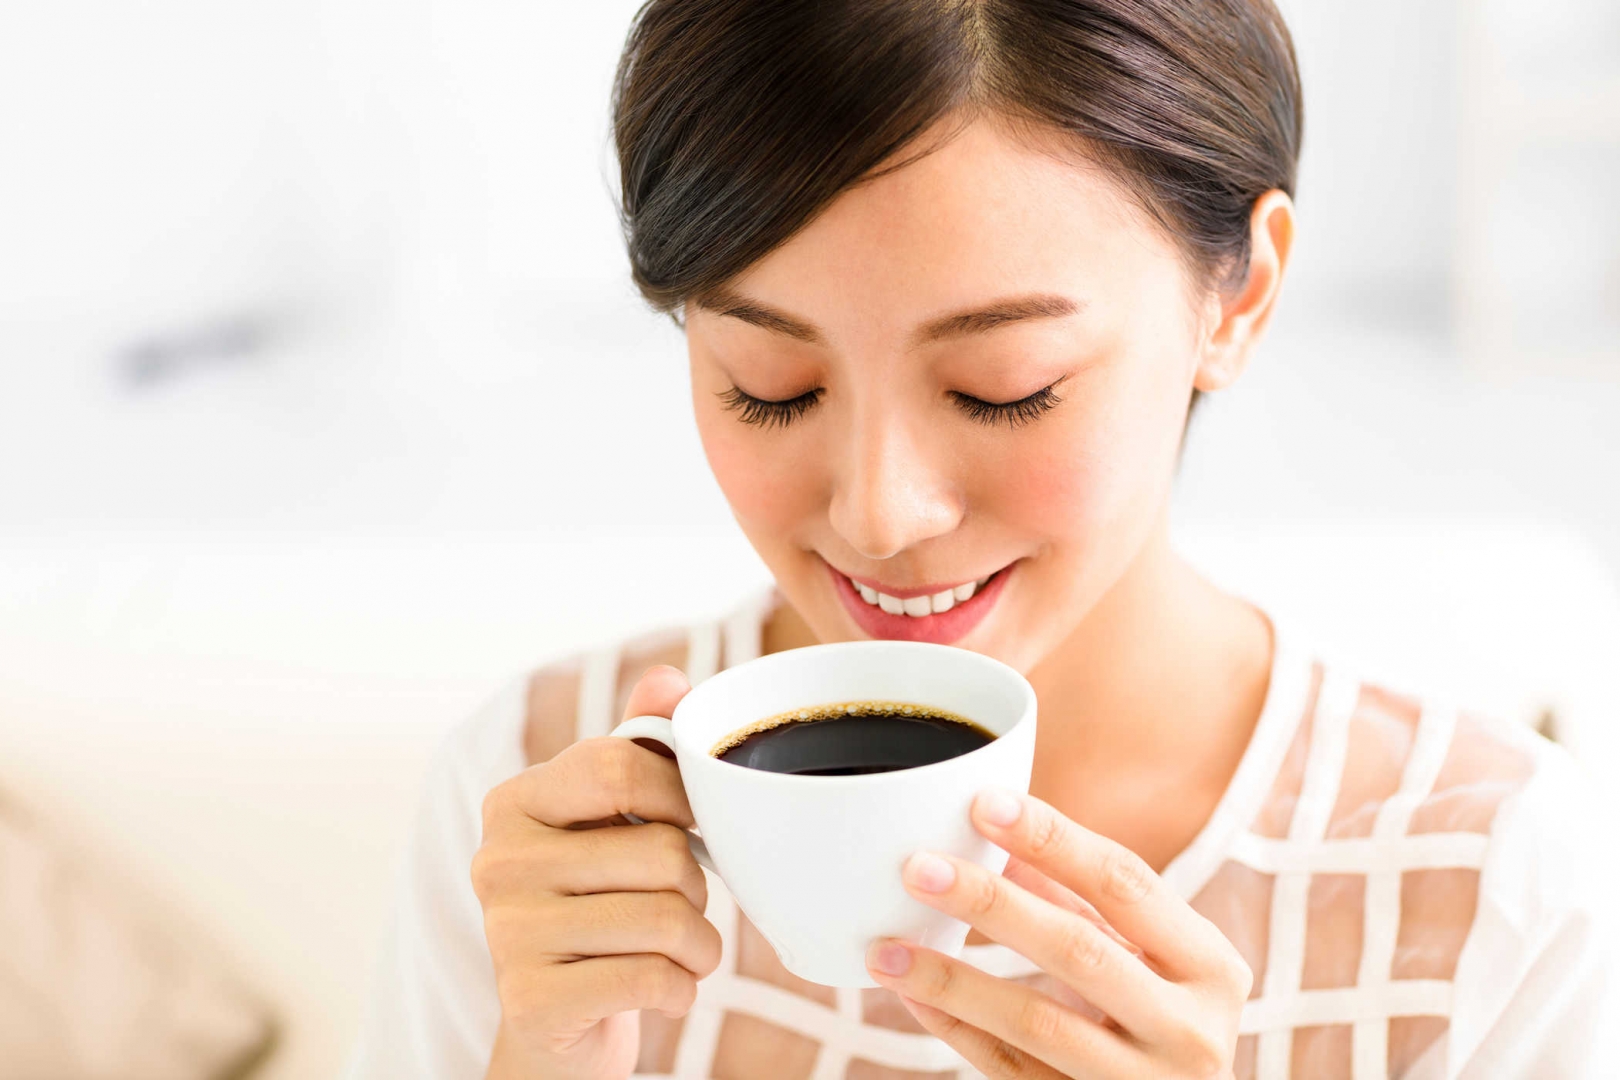 10 unexpected benefits of drinking coffee every day